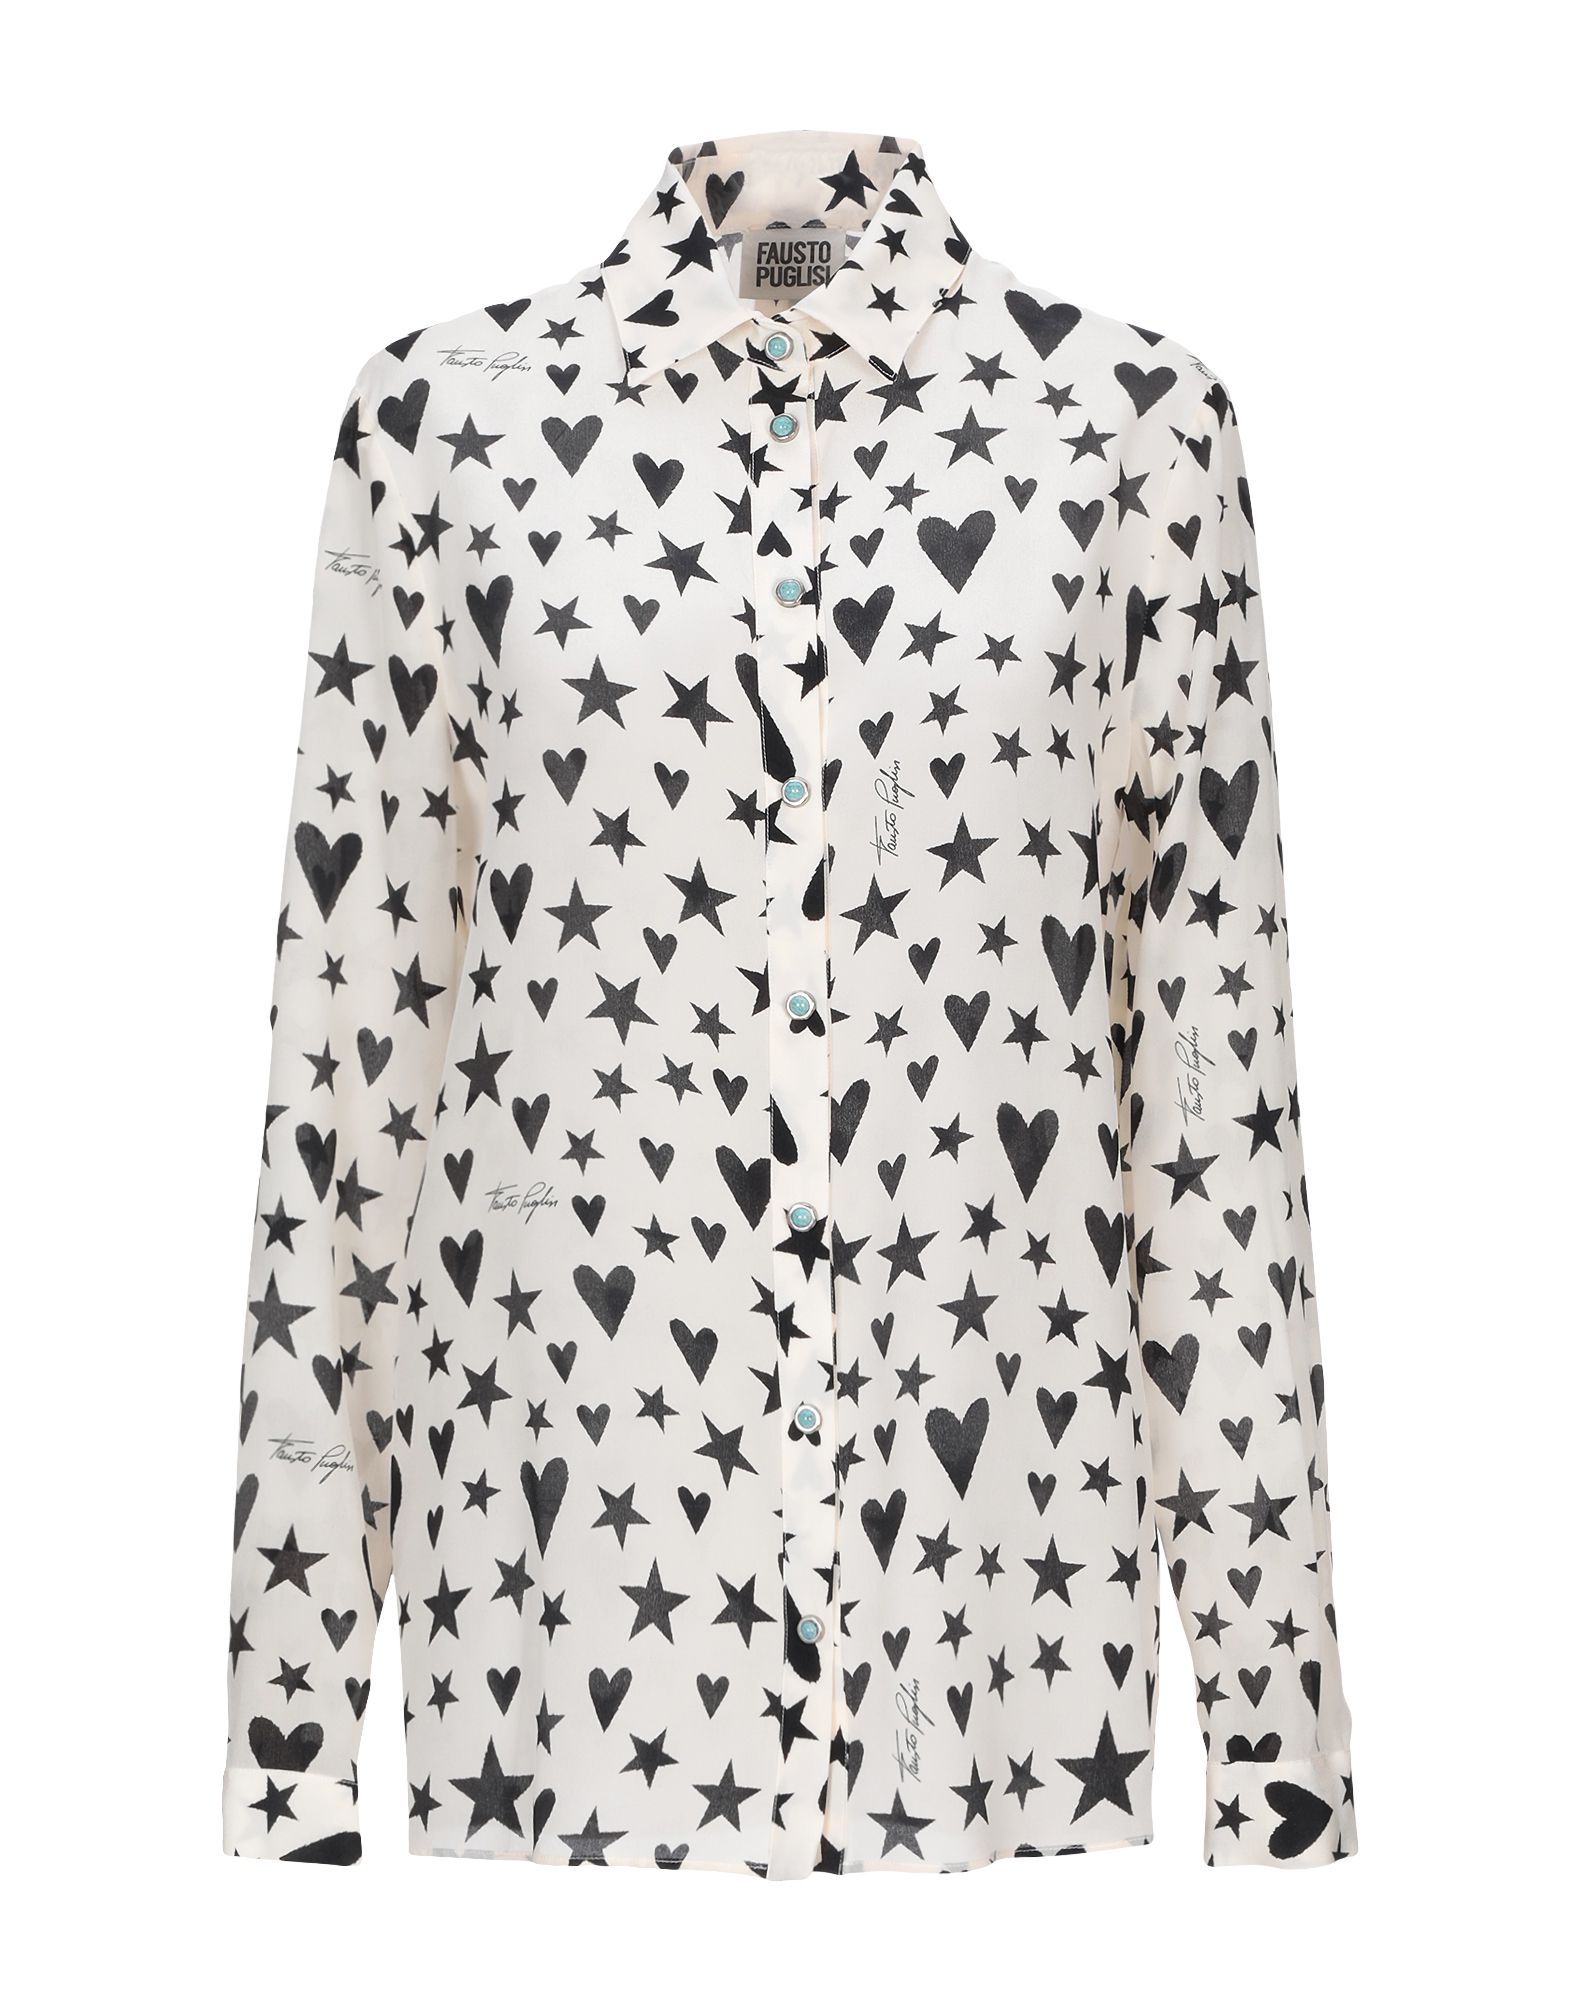 FAUSTO PUGLISI Patterned shirts & blouses,38830100TF 4